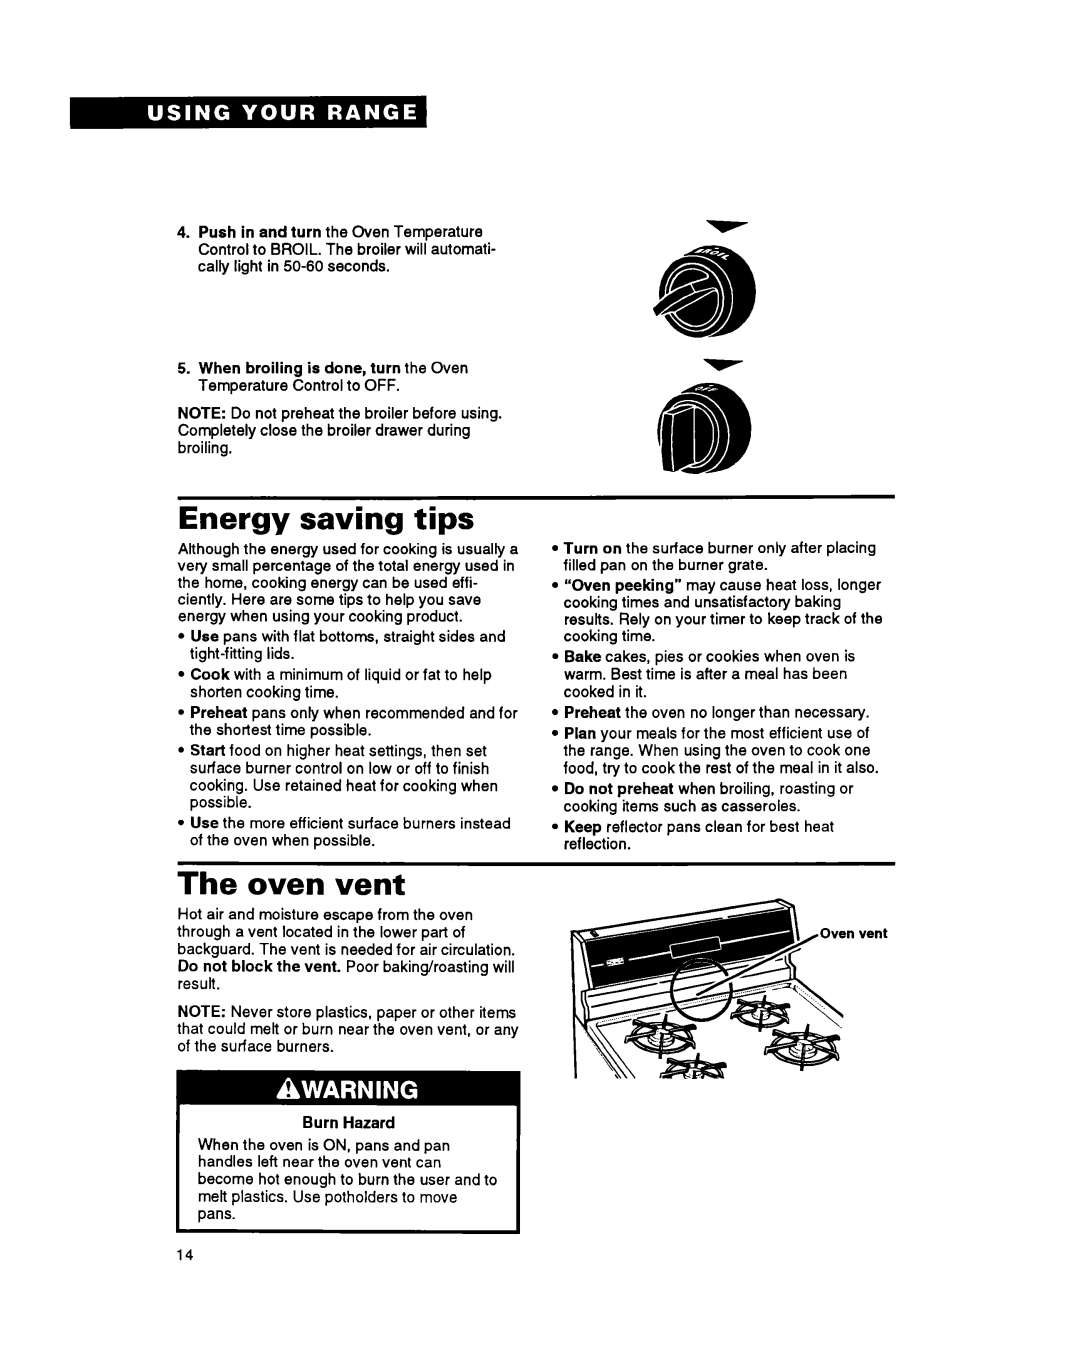 Whirlpool FGP335Y, FGP355Y, FGP345Y, FGC355Y important safety instructions Energy saving tips, The oven vent 